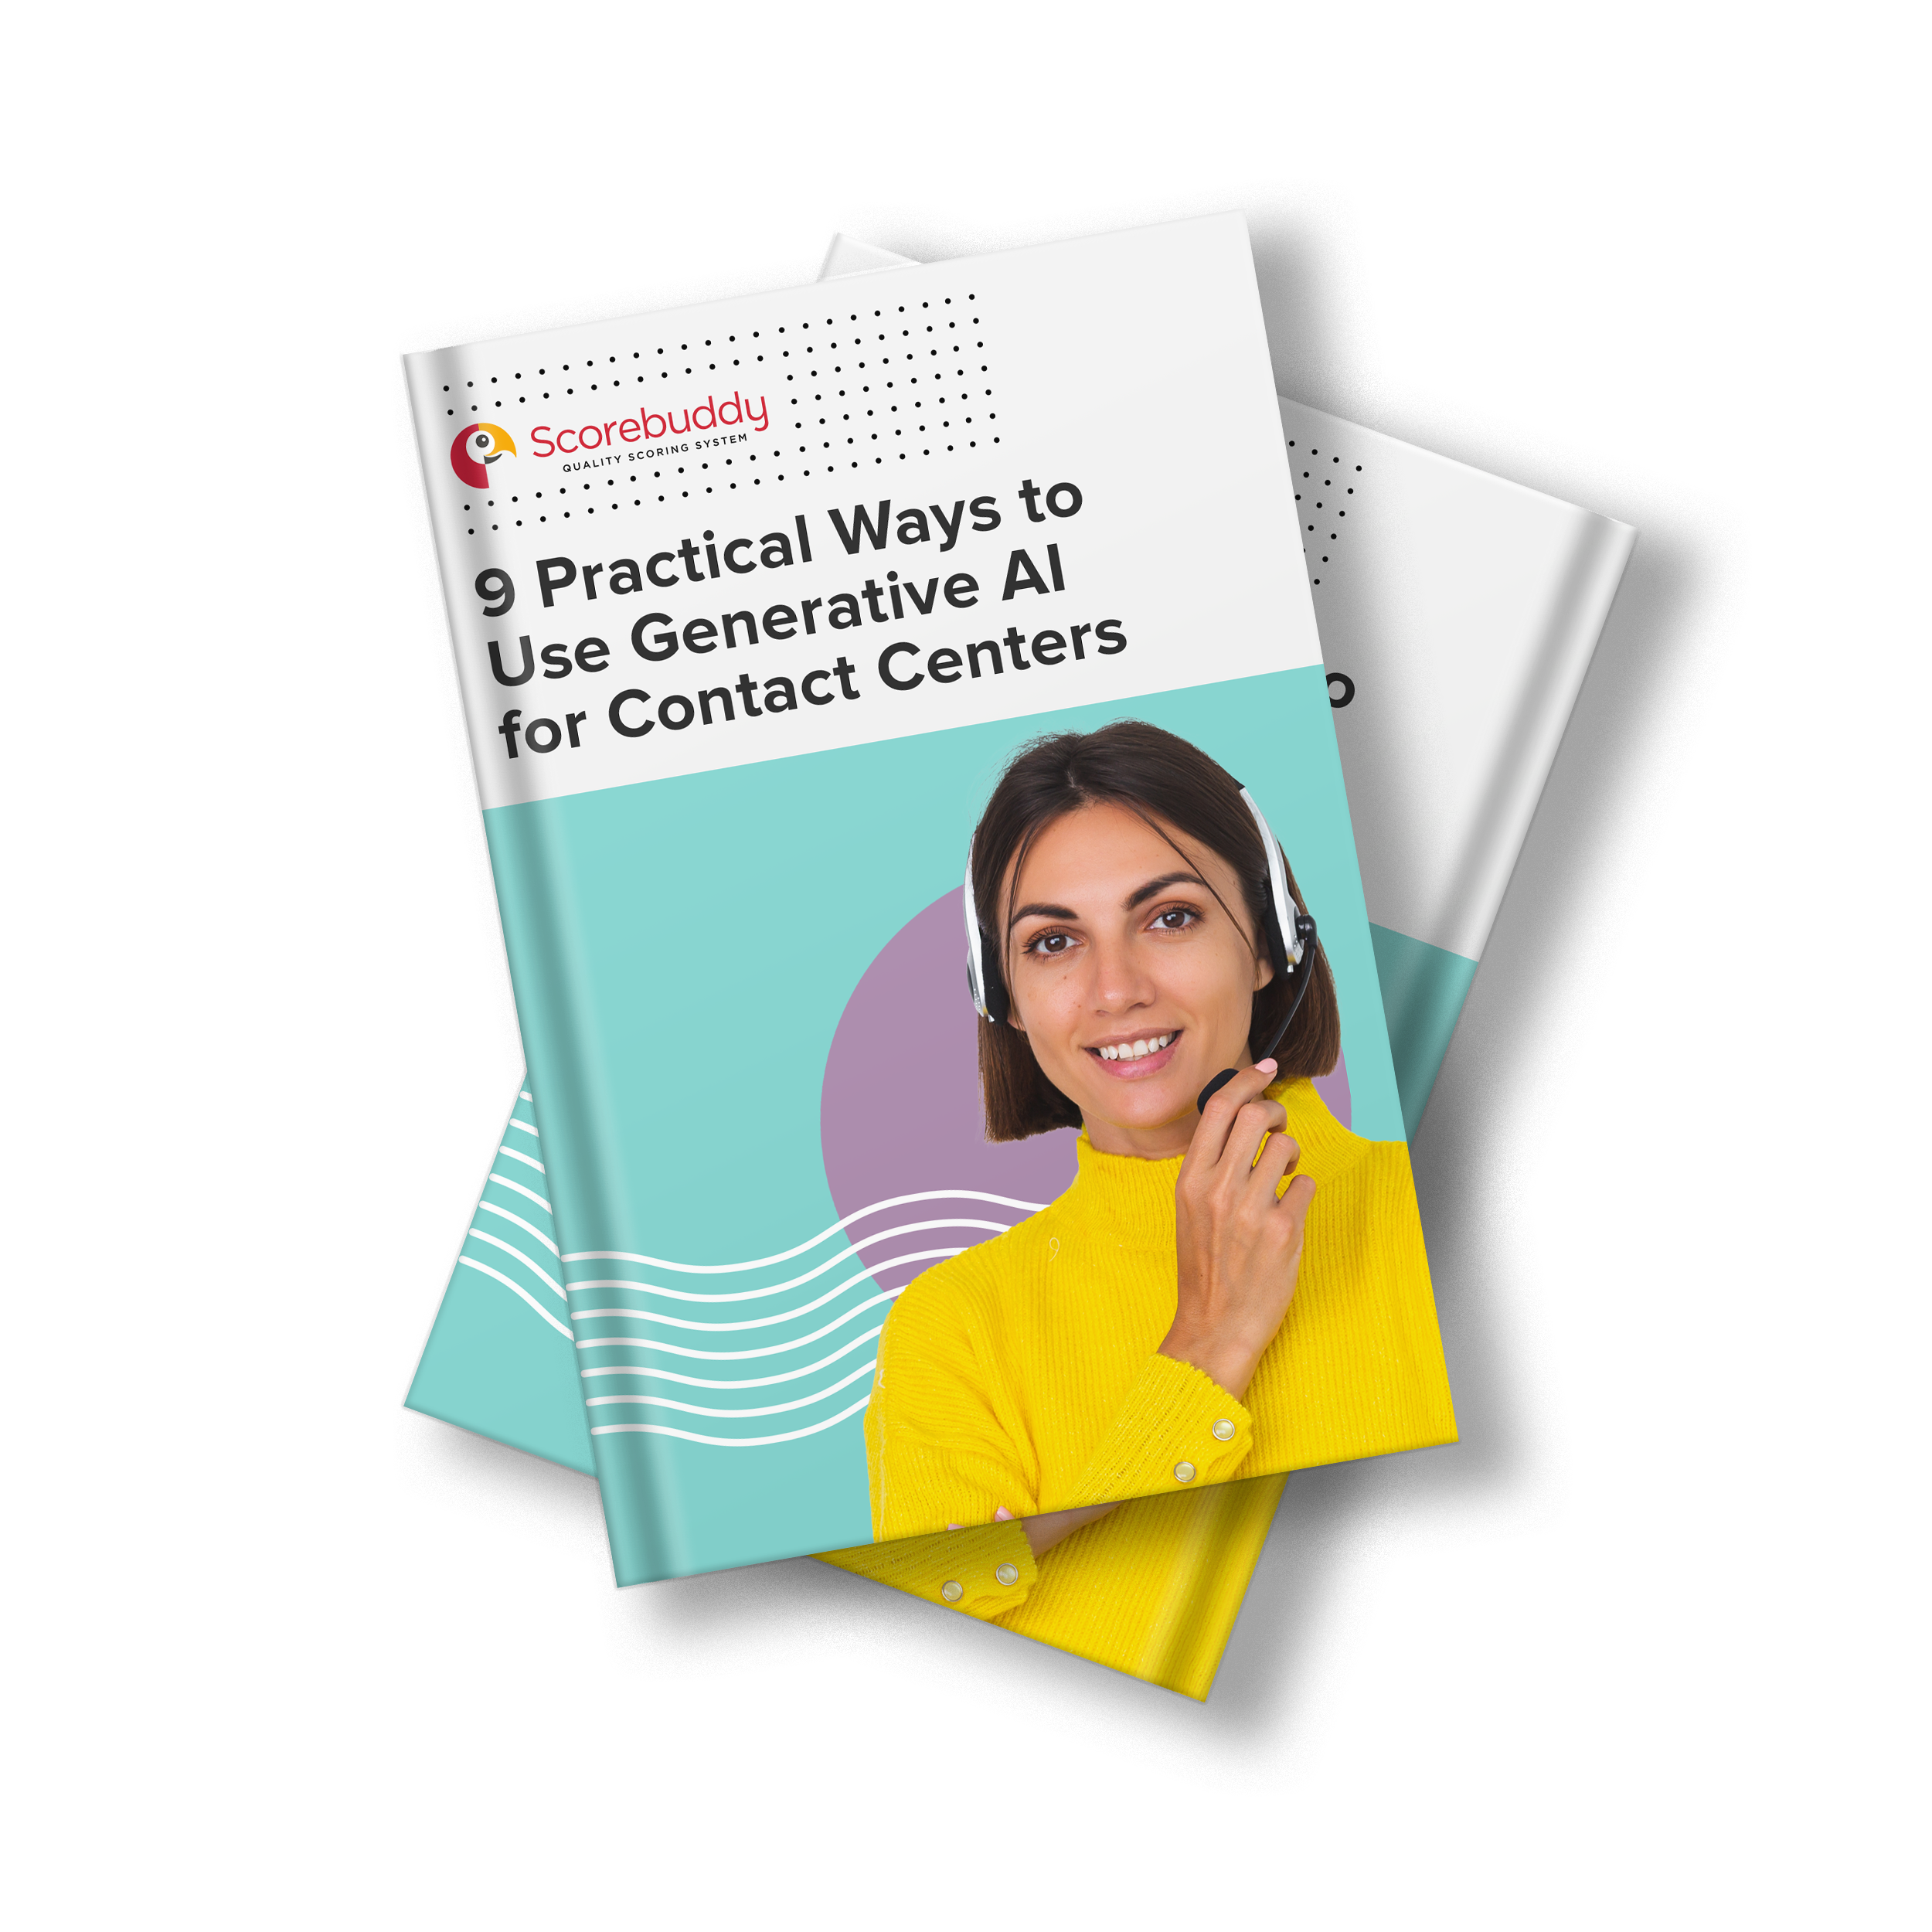 Cover Mockup 9 Practical Ways to Use Generative AI for Contact Centers copy (2)-1